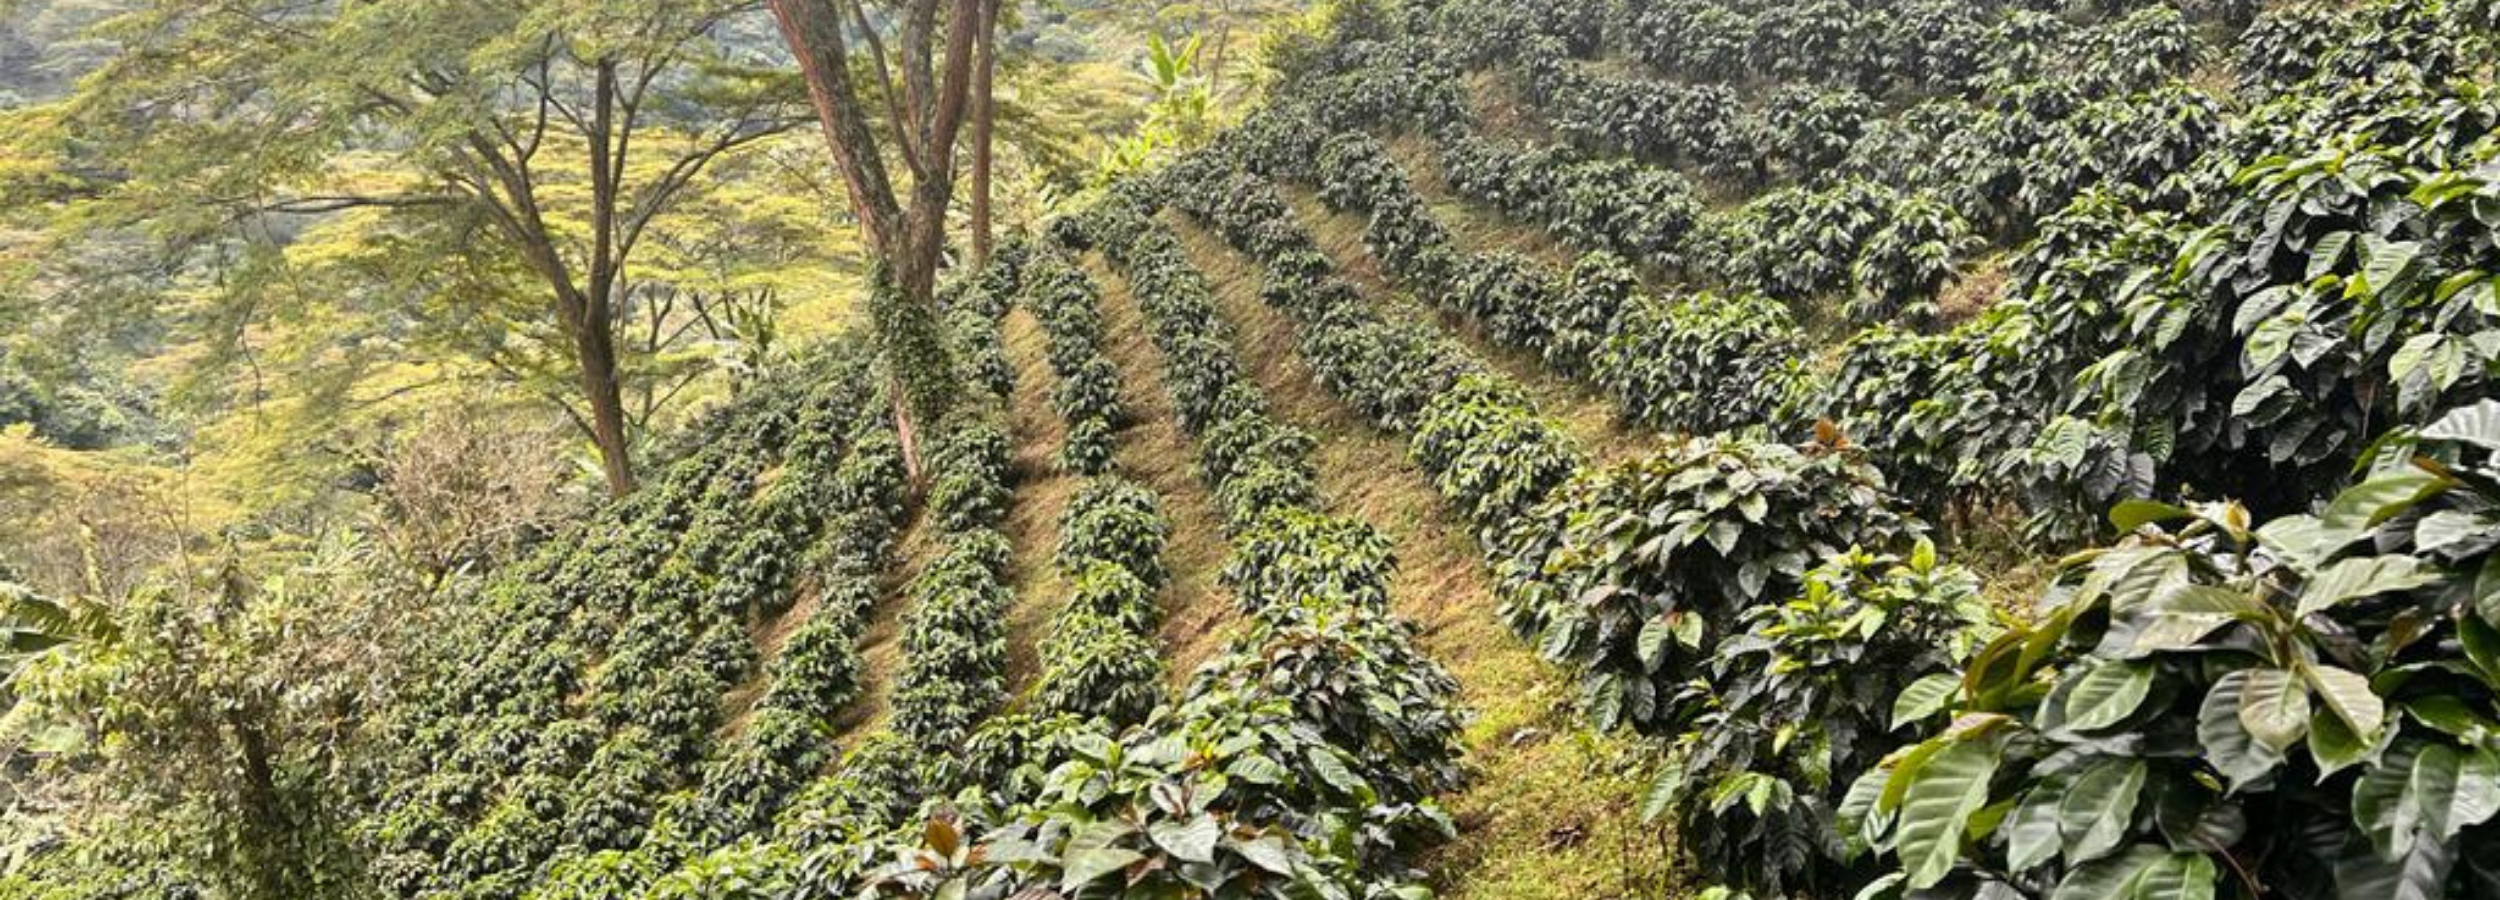 rows of coffee plants 